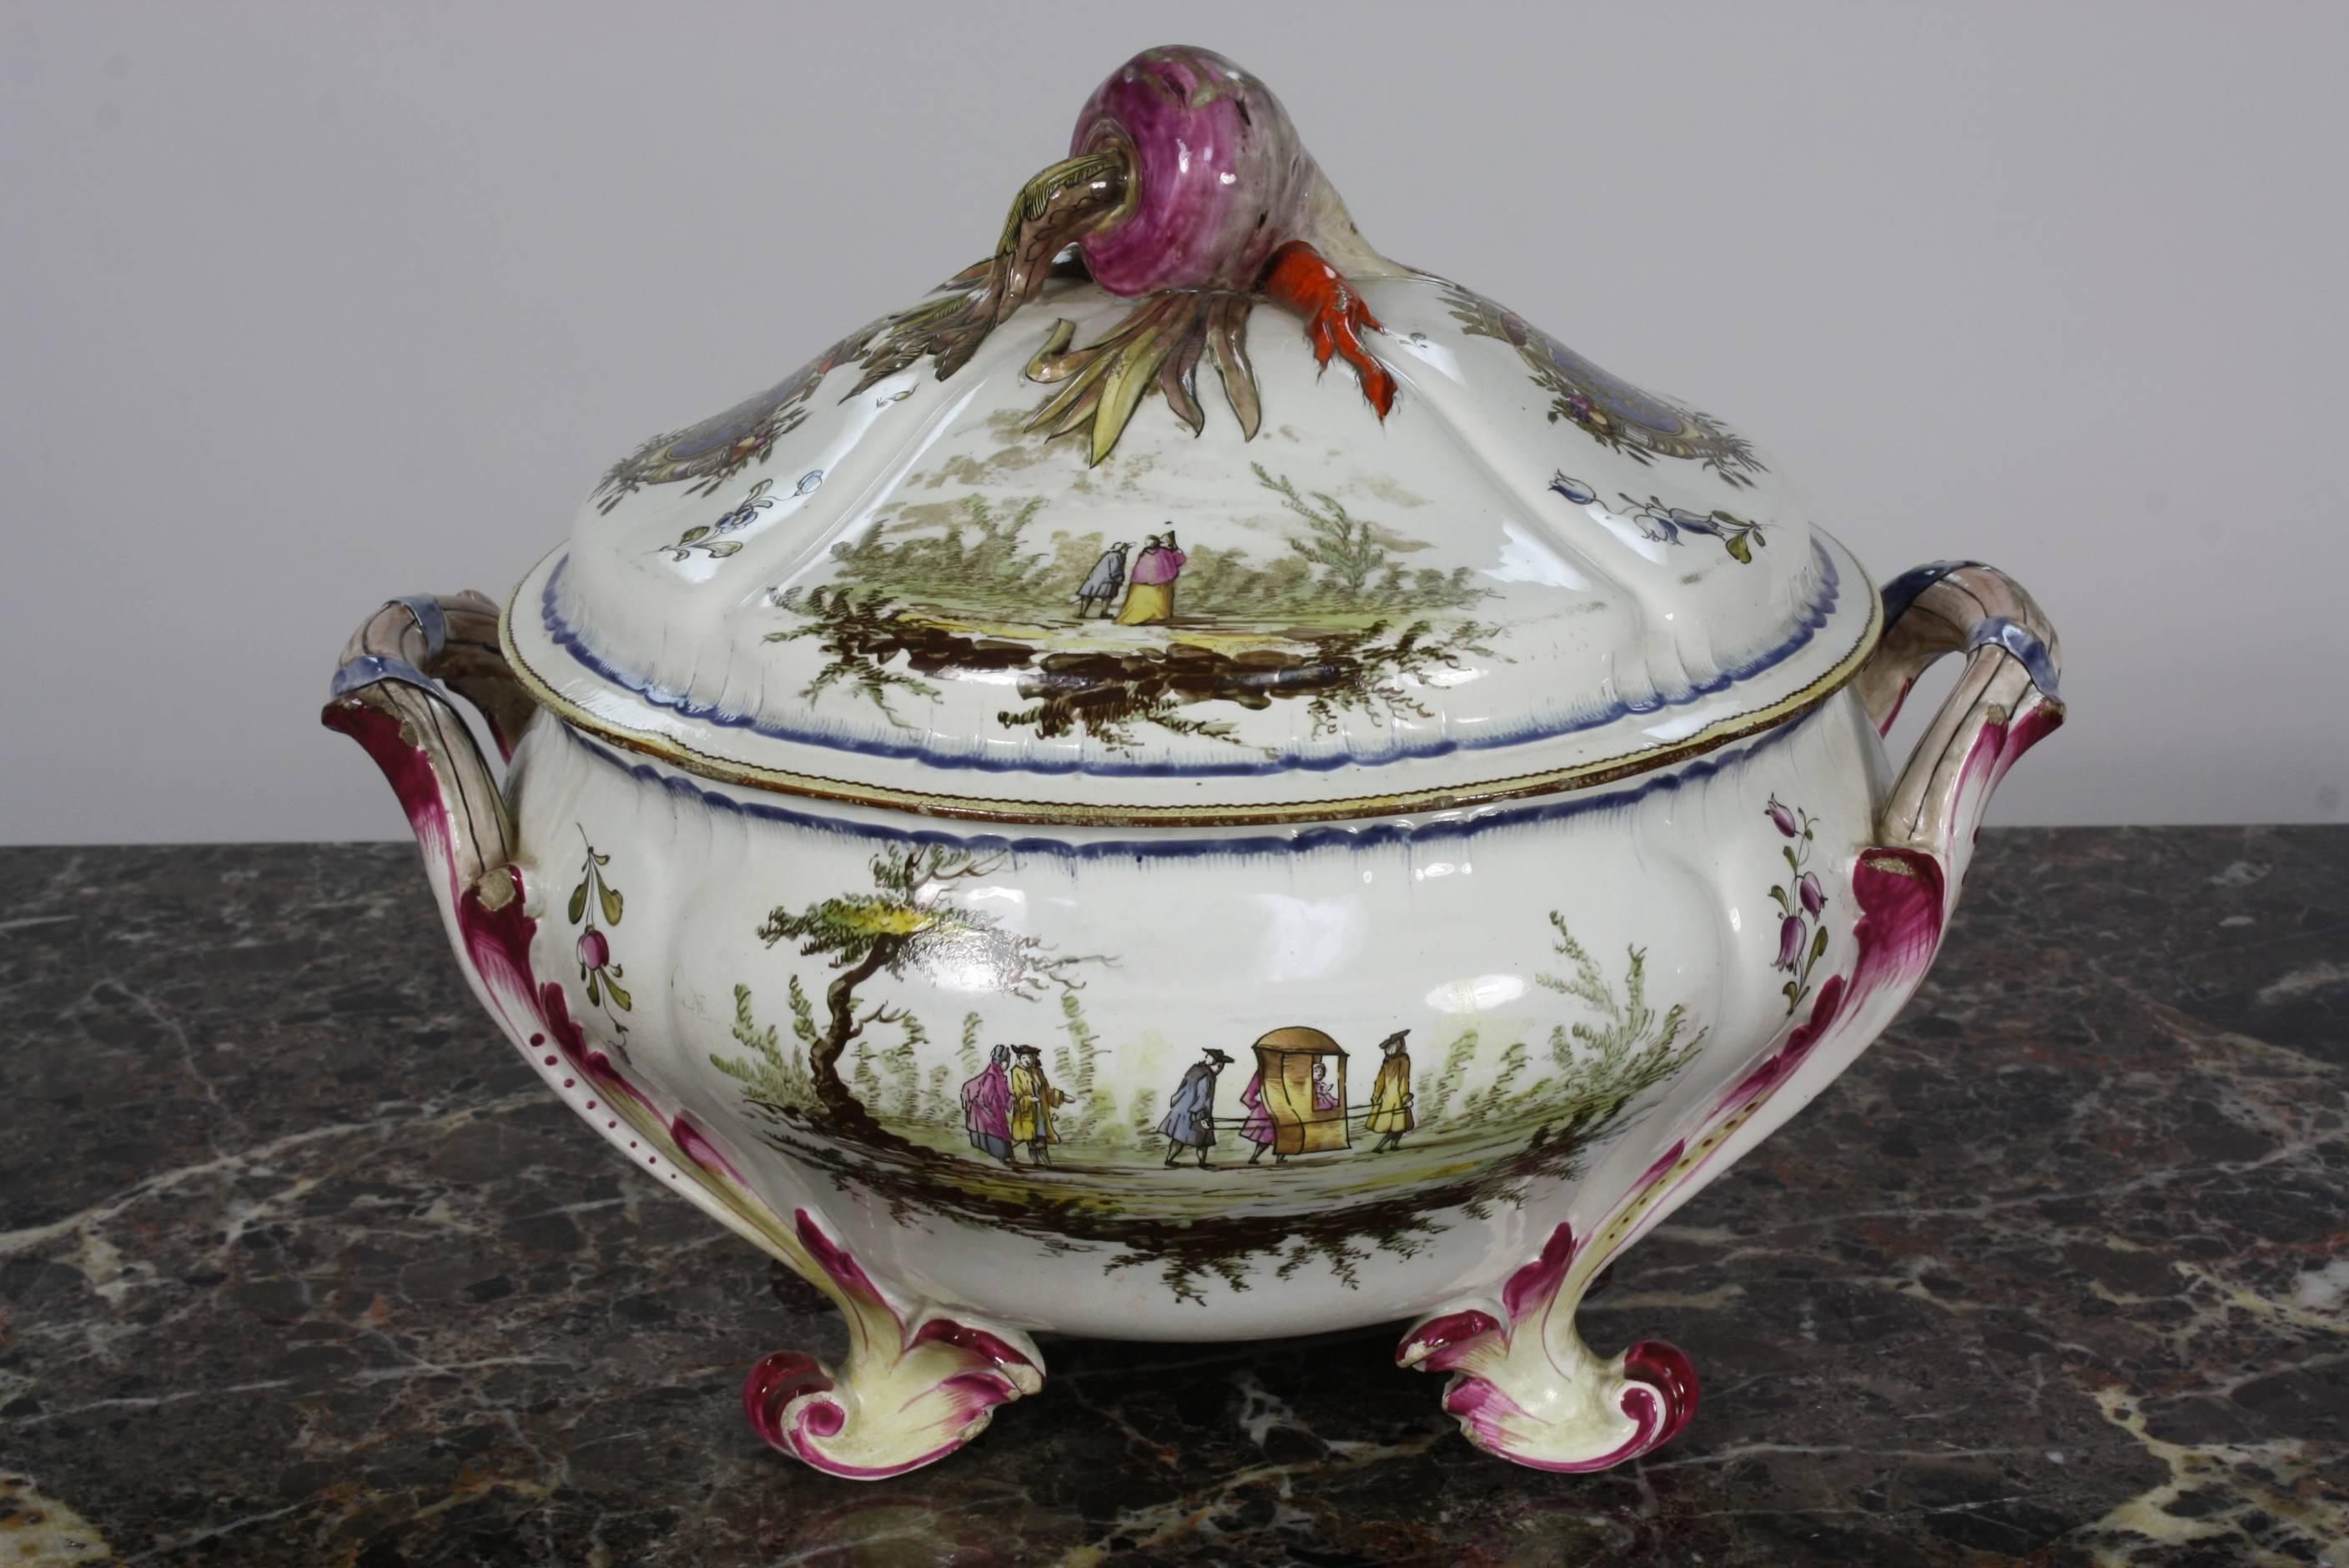 A lovely, highly-detailed French faience soup tureen, with handles, feet and nicely-sculpted vegetable decorated cover (18th century). The top cover has a radish, carrot and scallion. The painted decoration on the sides includes a shield with